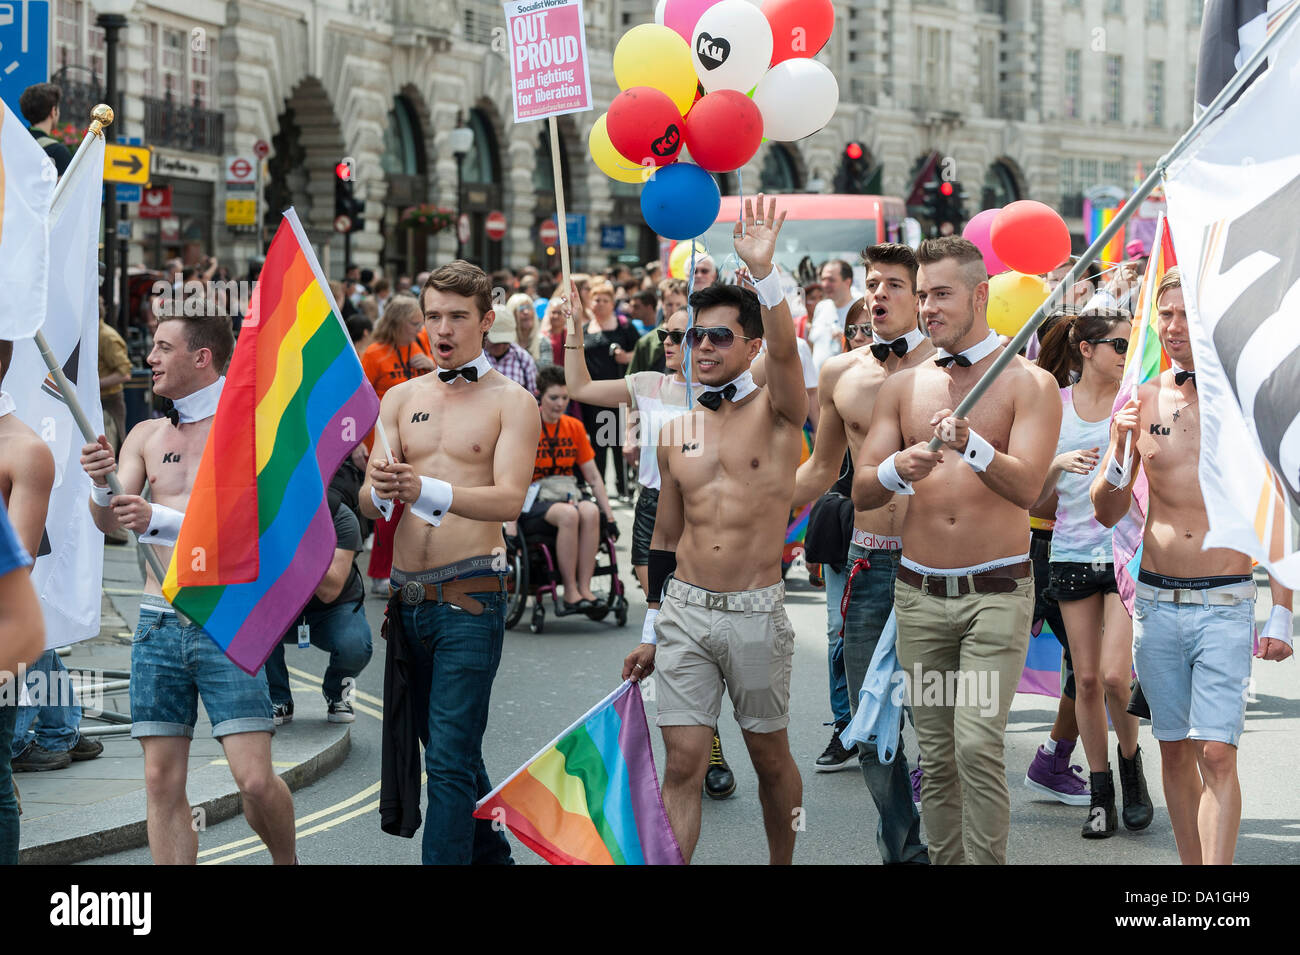 The London Pride parade on Regent's Street in London. Stock Photo